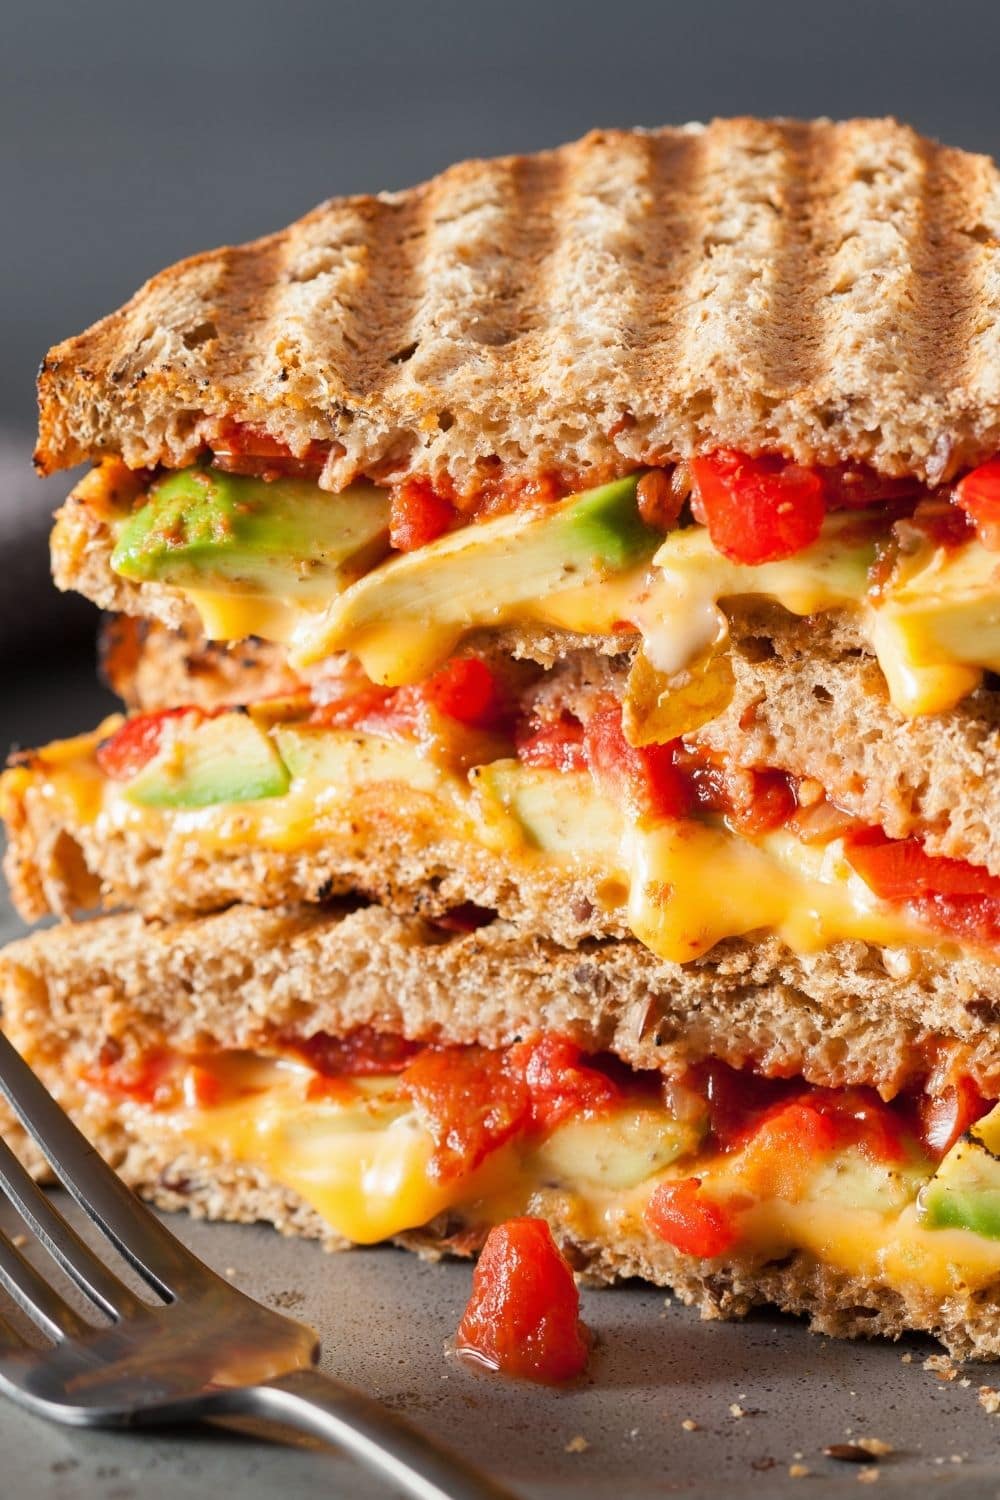 Homemade Grilled Cheese Sandwich with Avocado and Tomato